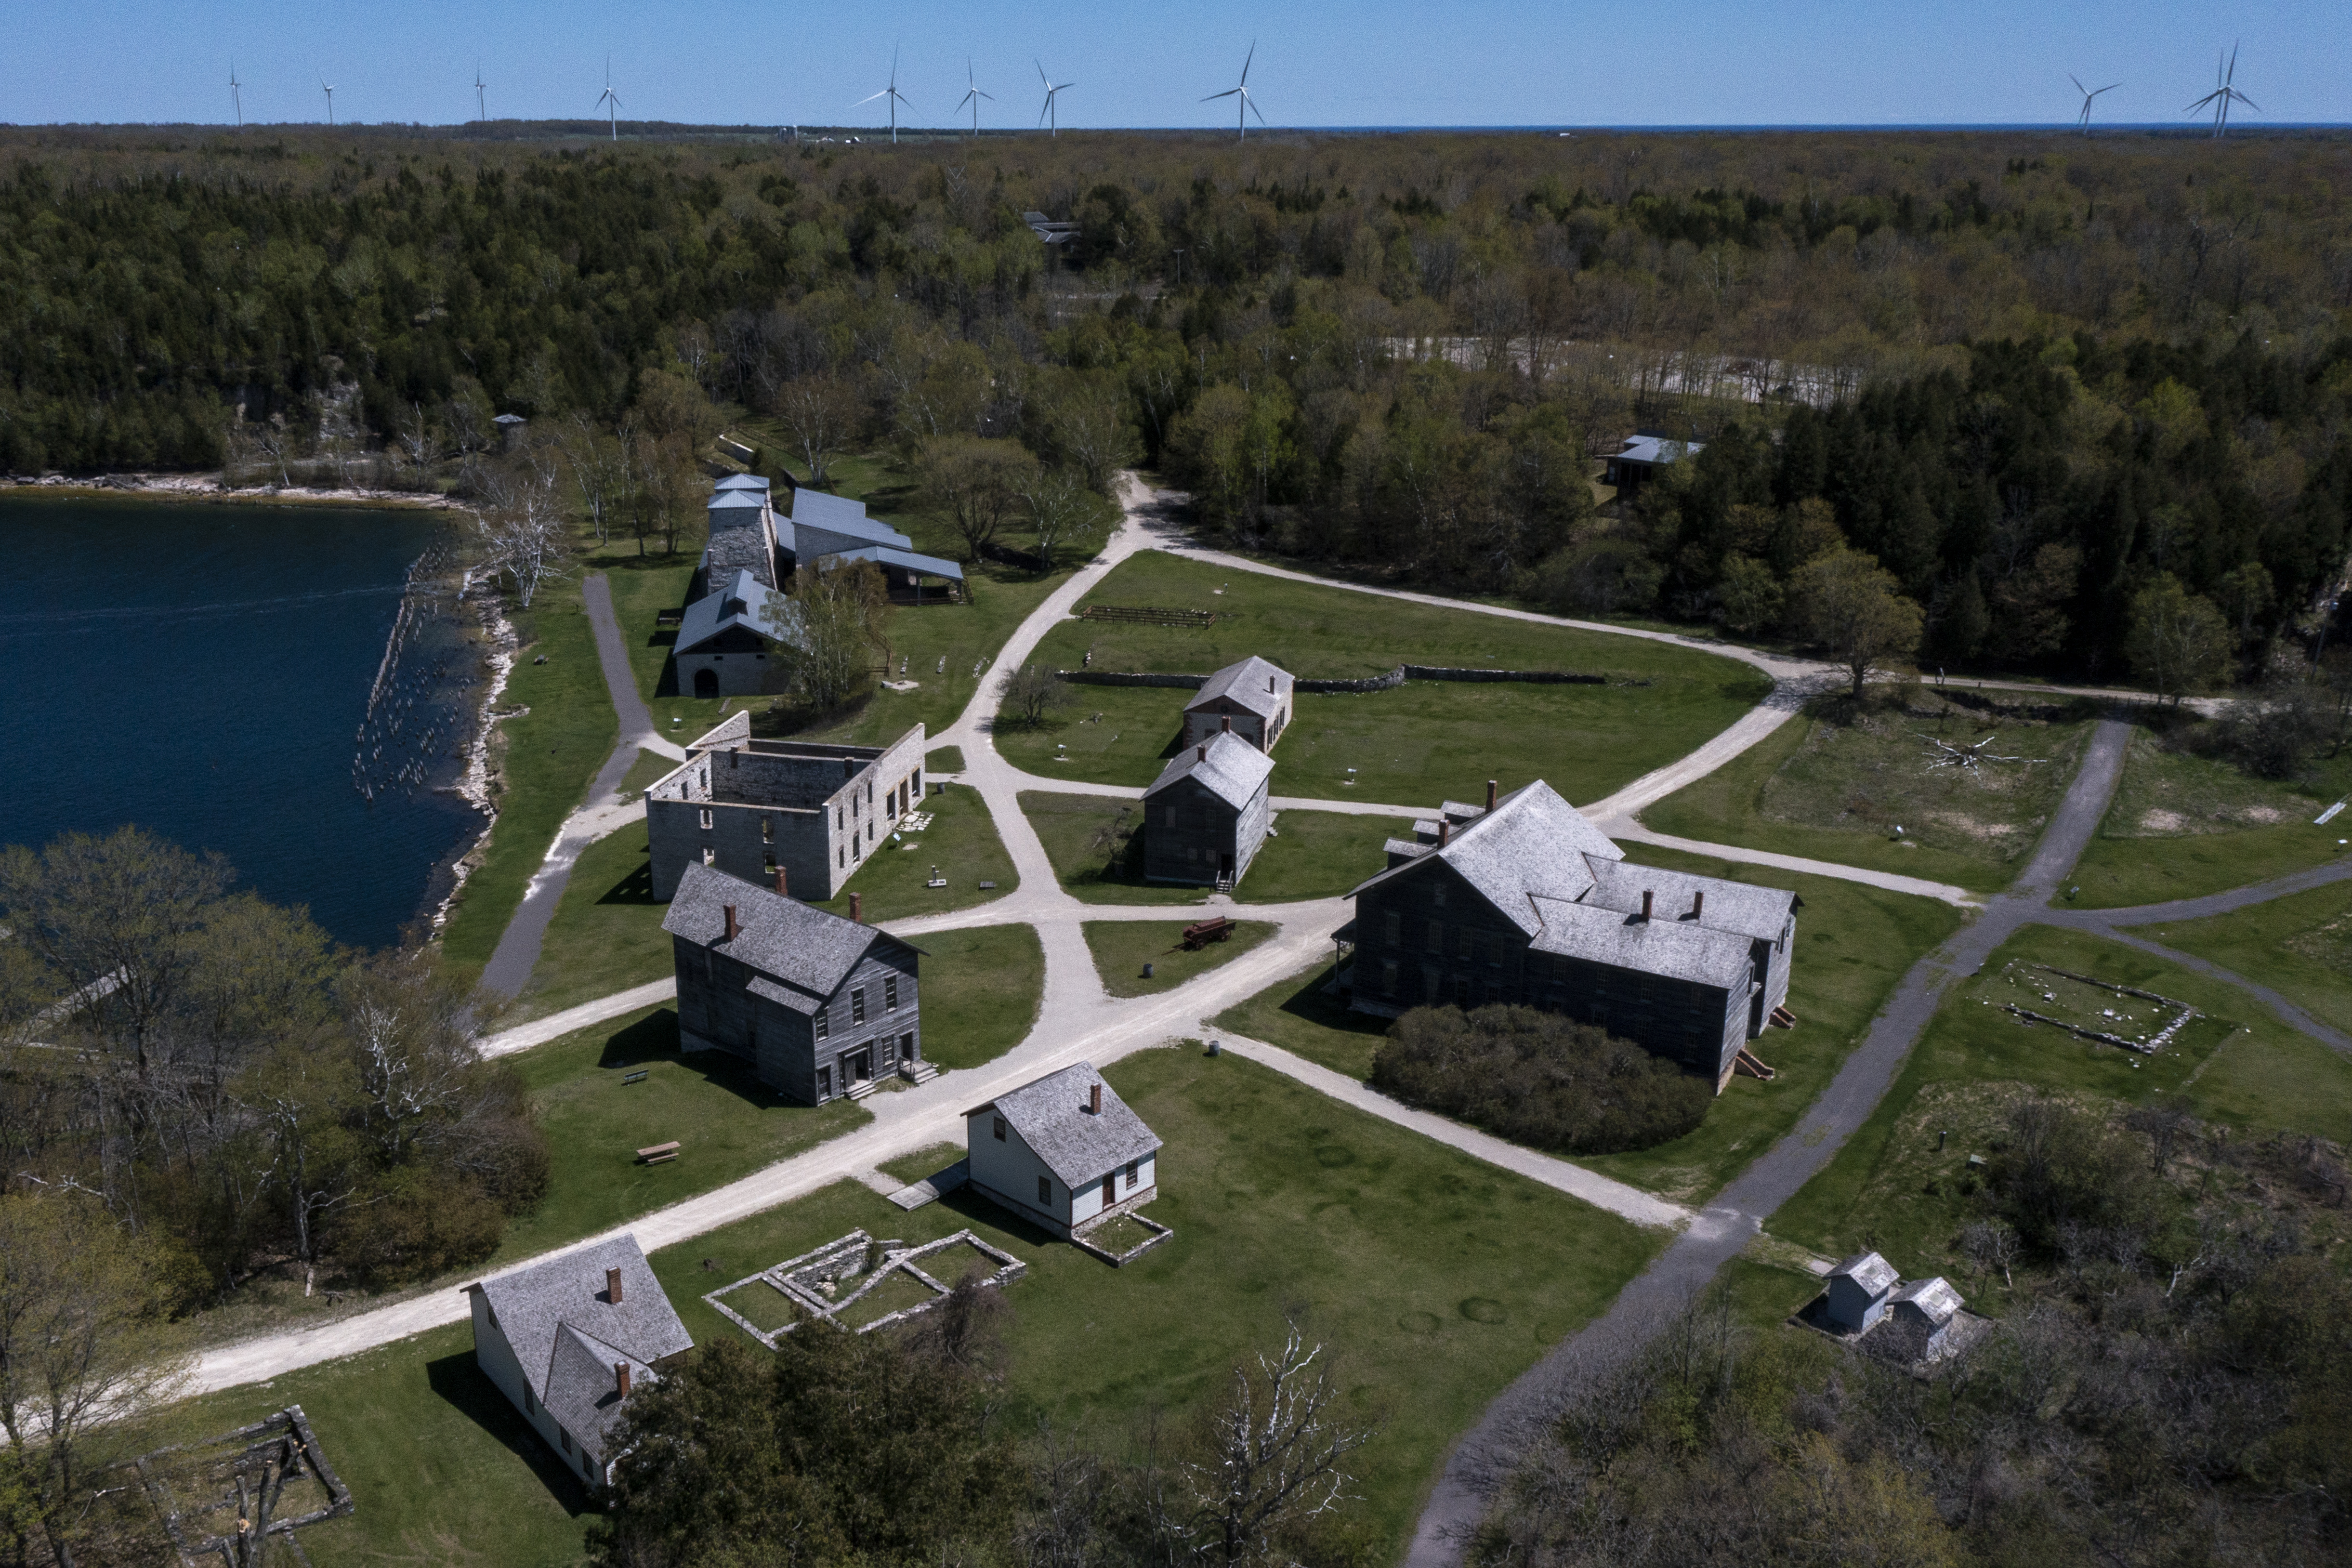 Fayette Historic State Park near Garden on Tuesday, May 17, 2022. The historic townsite manufactured charcoal pig iron between 1867 and 1891. (Drone image by Cory Morse | MLive.com)
